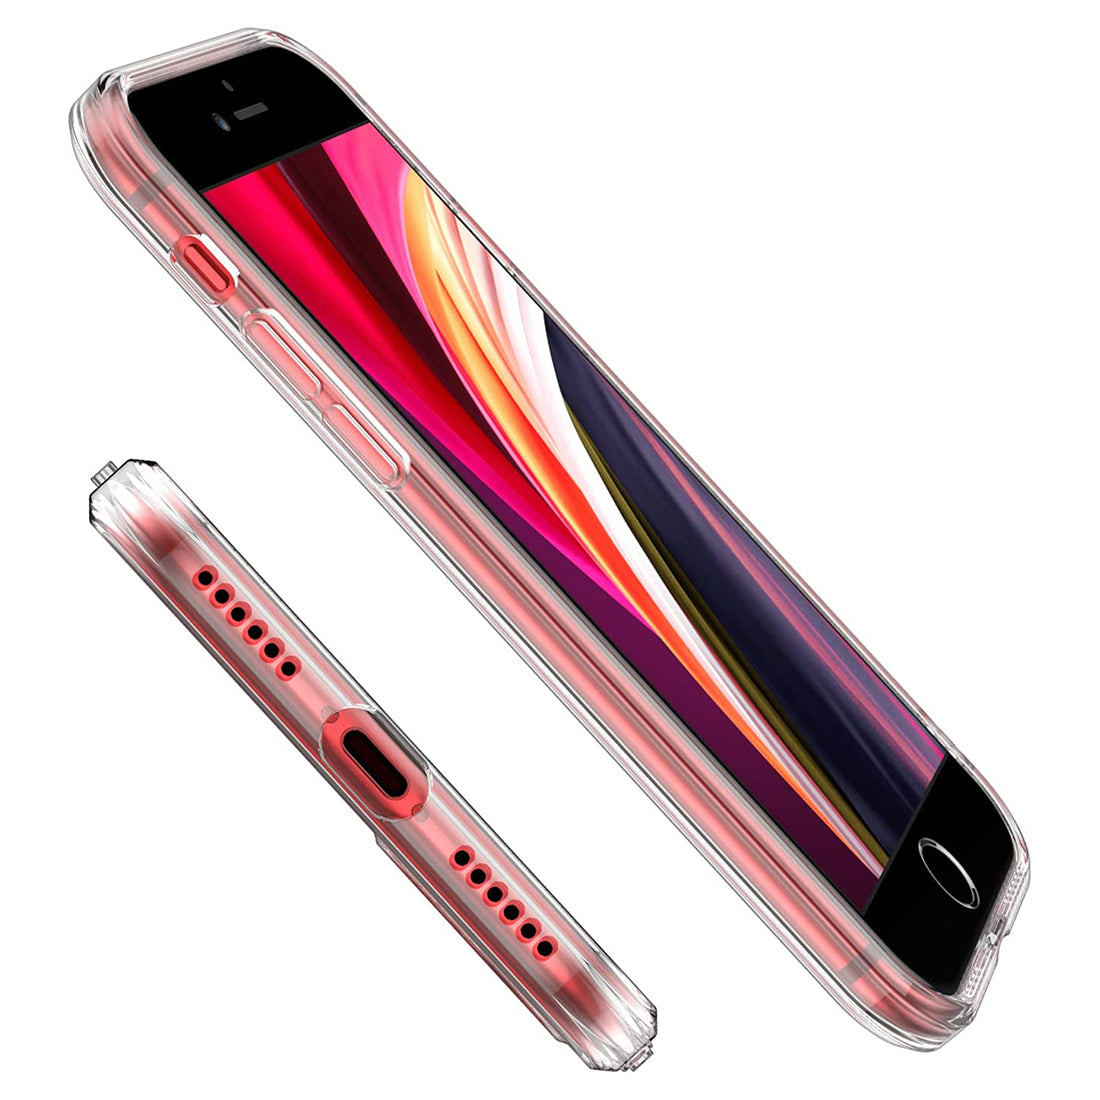 Super Clear Camera Protection Back Cover for Apple iPhone 7 / iPhone 8